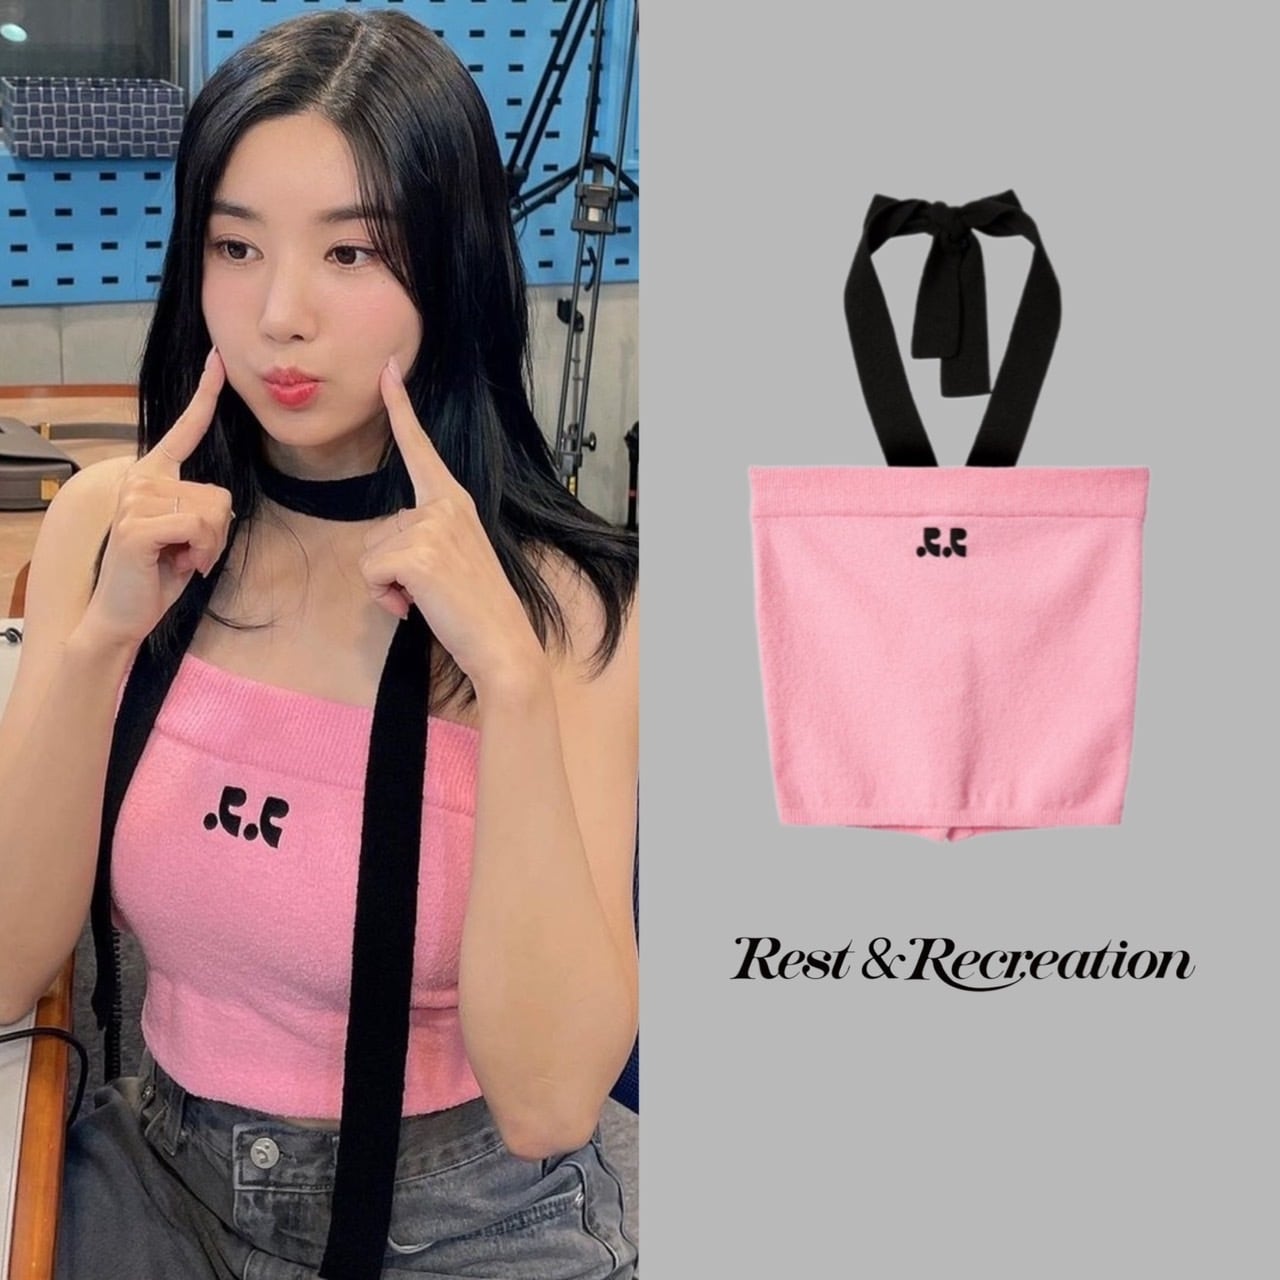 Rest&Recreation RR LOGO KNIT TUBE TOPピンク 【65%OFF!】 - トップス